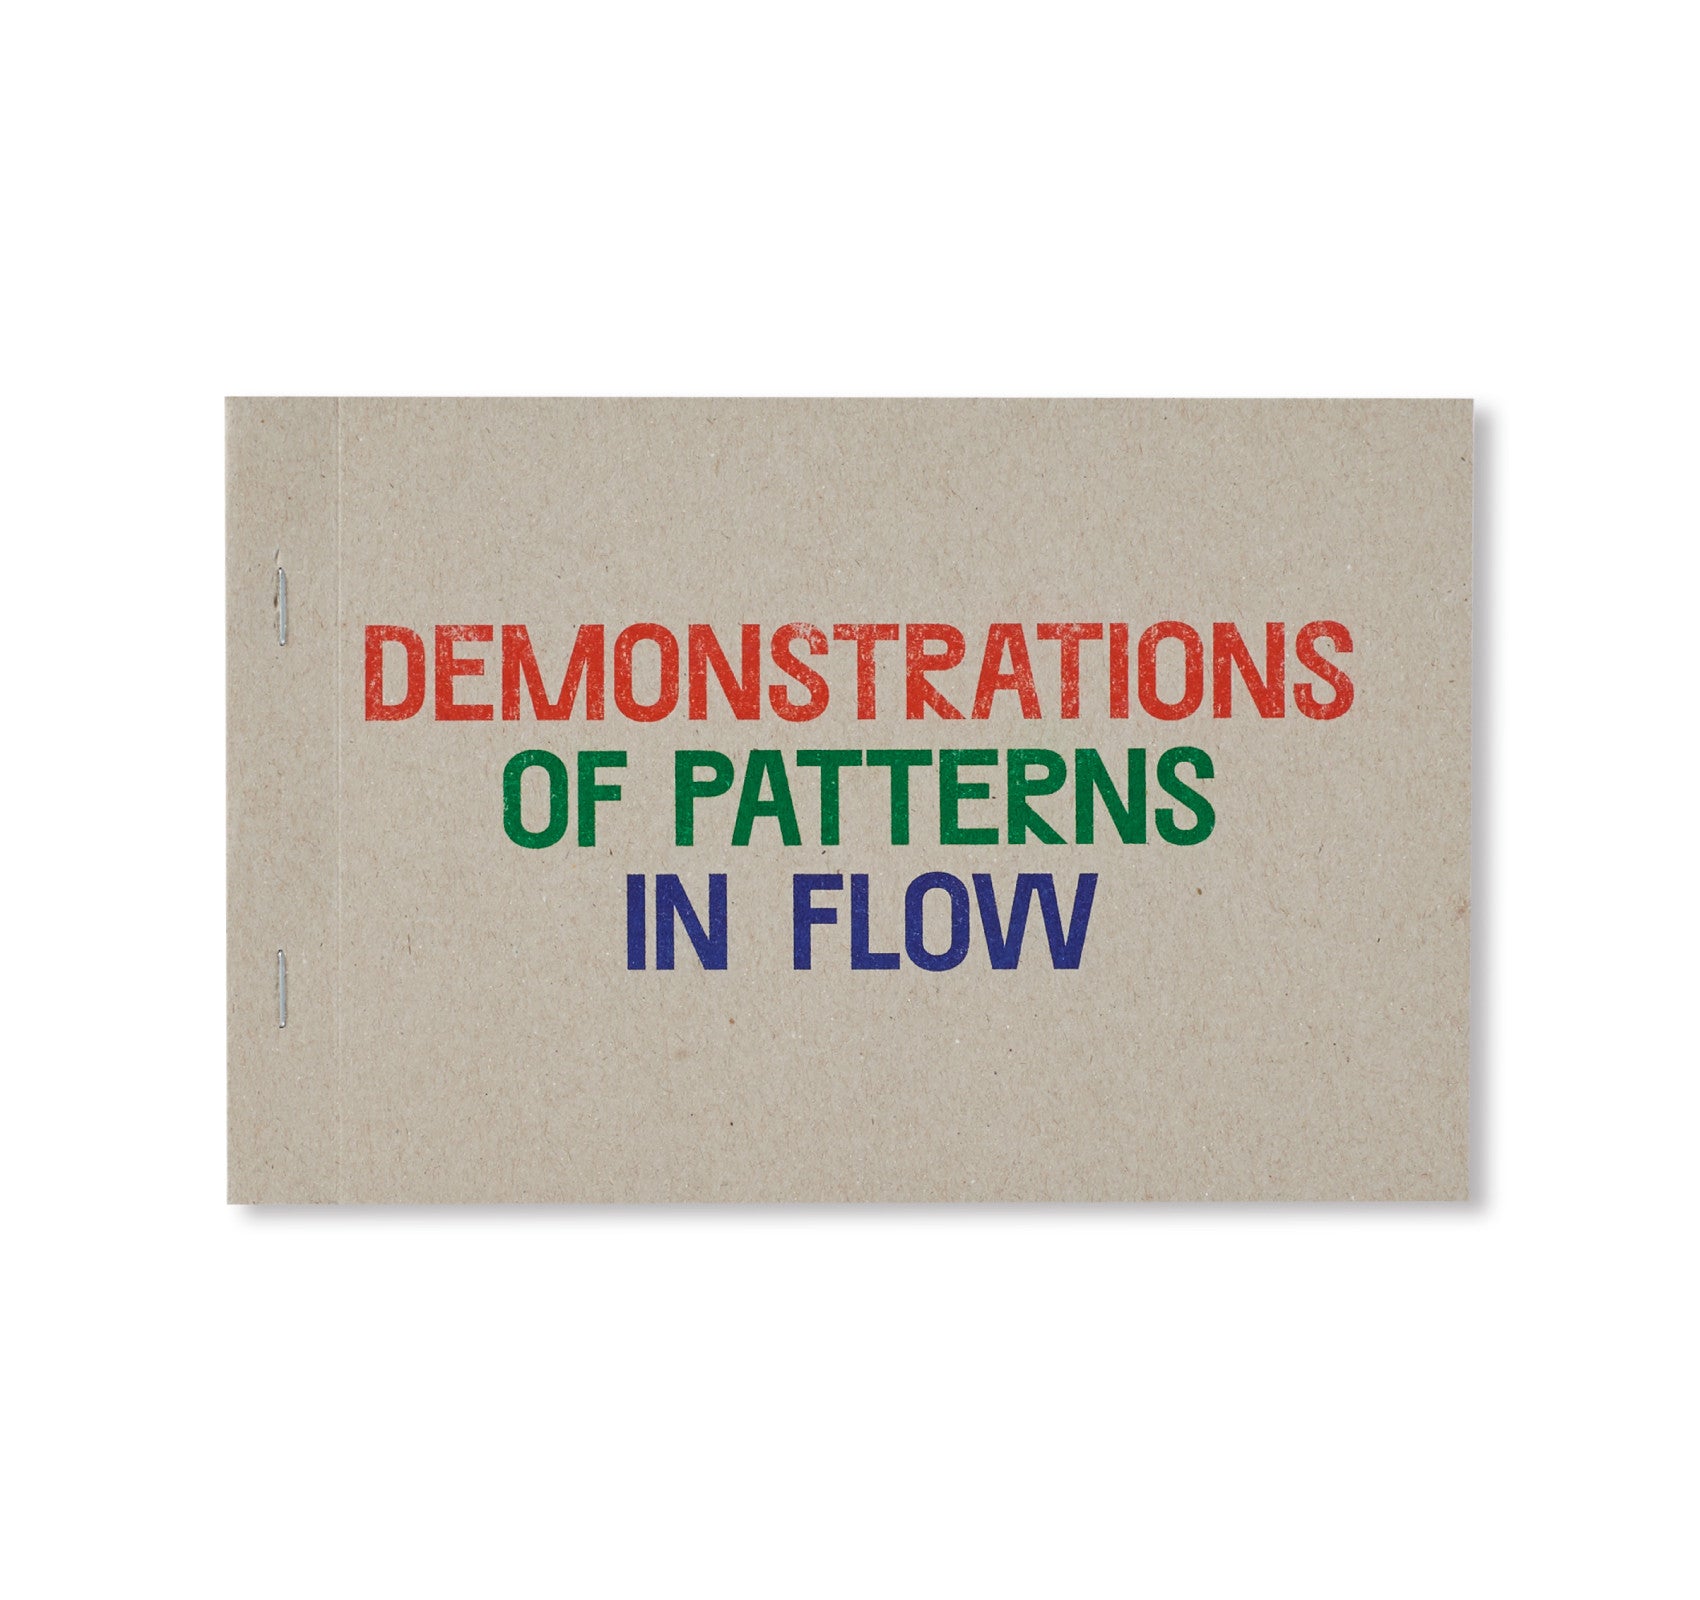 DEMONSTRATIONS OF PATTERNS IN FLOW by Oliver Griffin